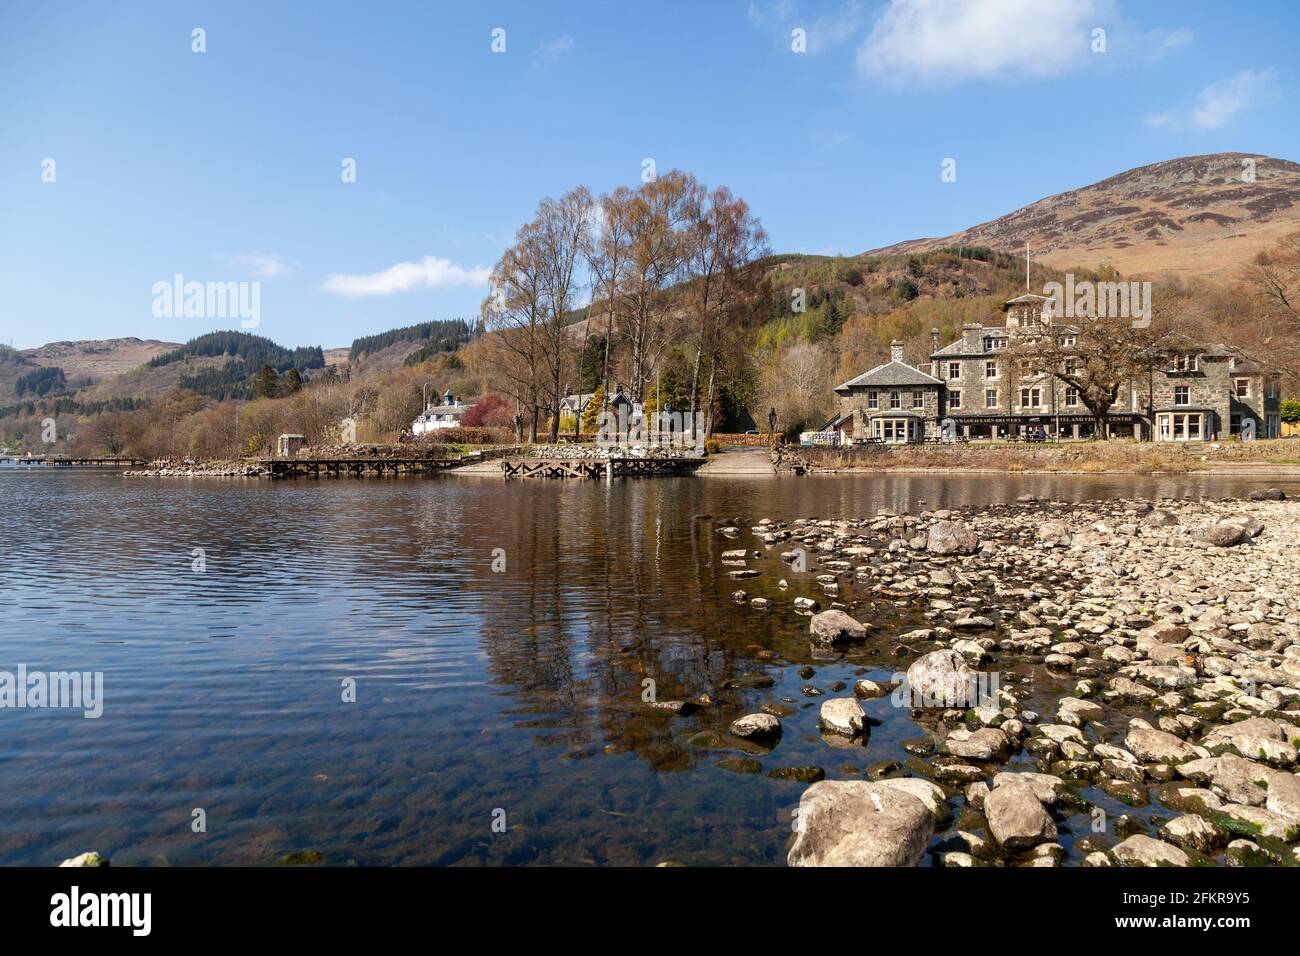 Looking towards the Hotel and Visitor Centre at St Fillans on Loch Earn, Scotland. Stock Photo